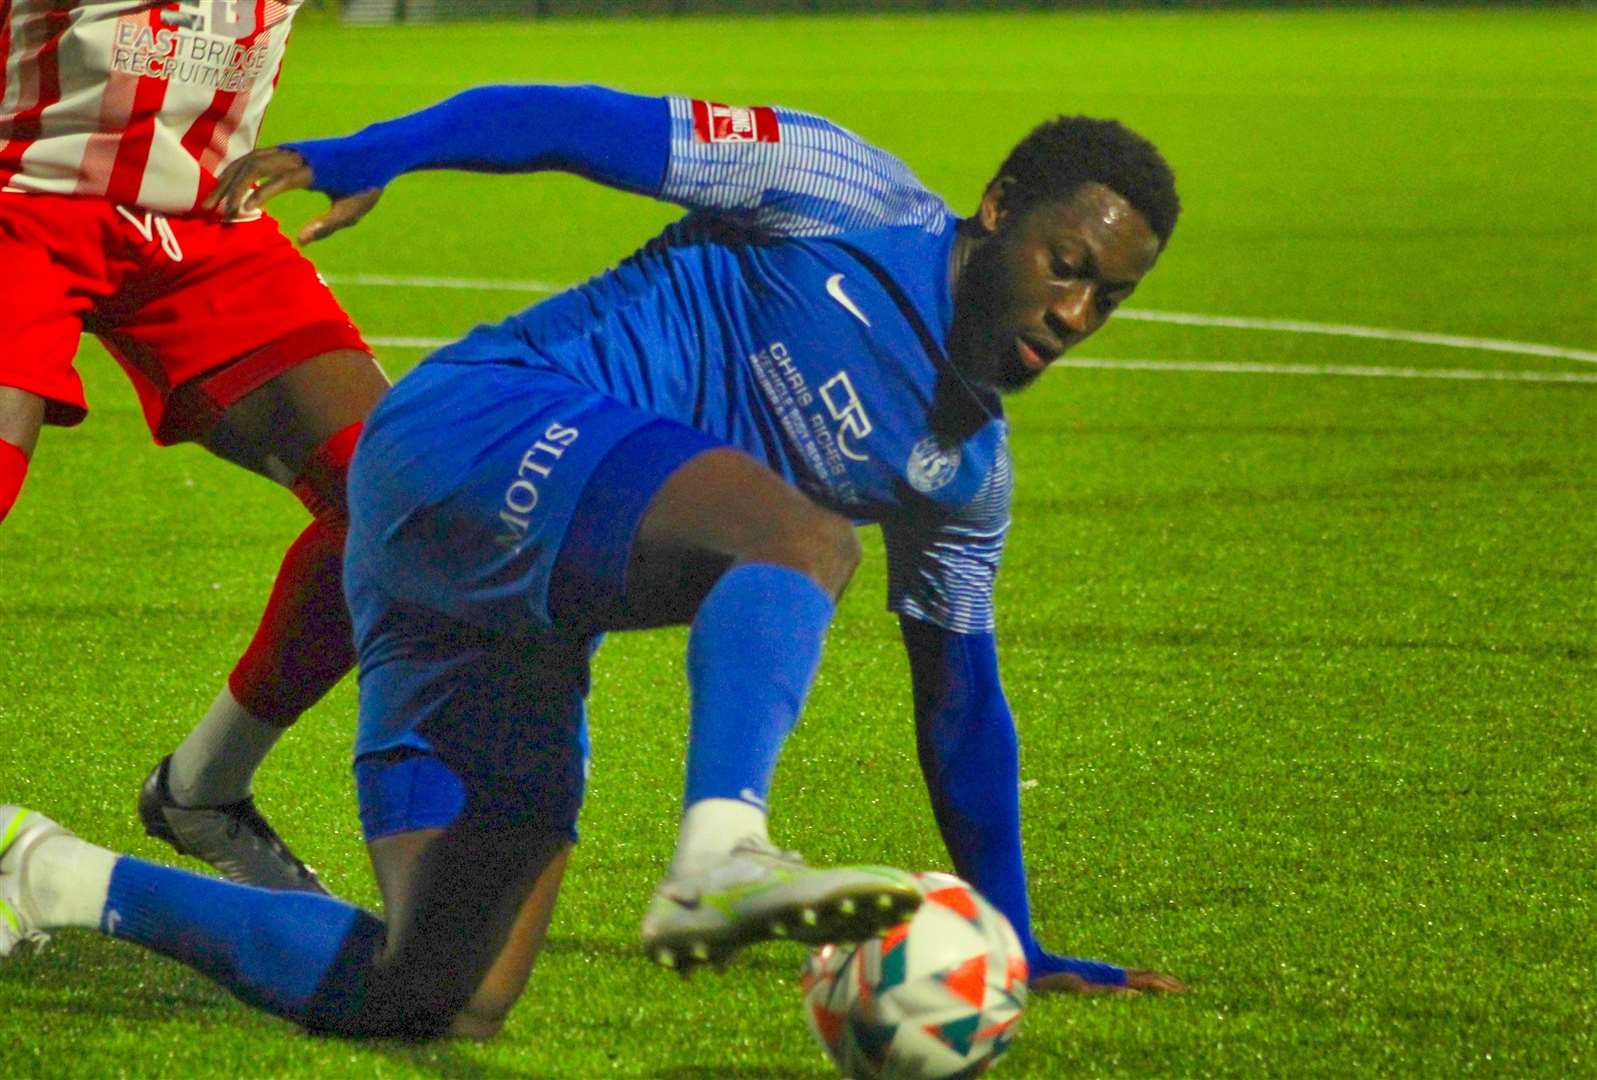 Herne Bay frontman Marcel Barrington attacking the Bowers & Pitsea goal. Picture: Keith Davy